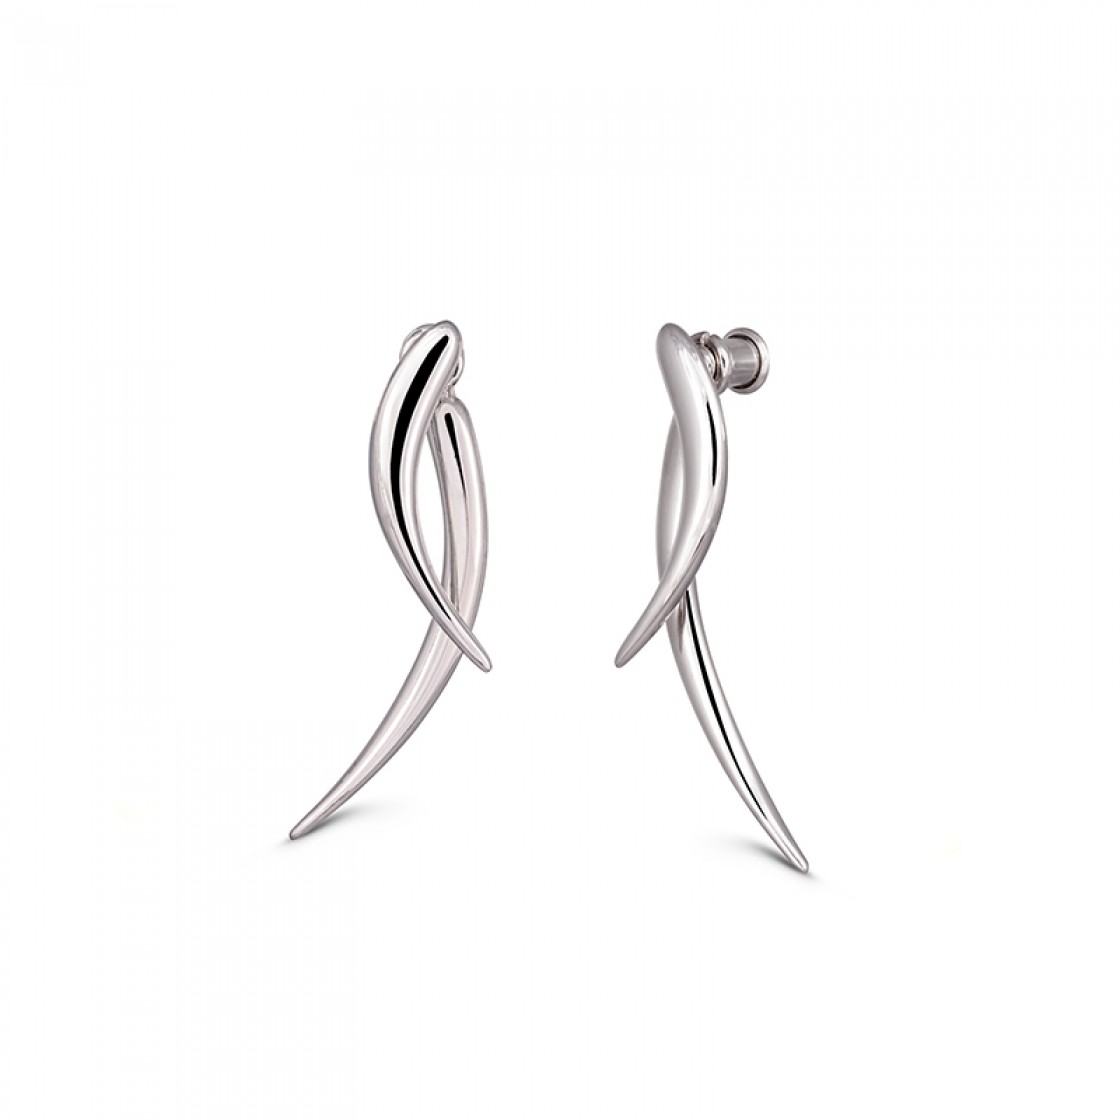 A bold statement piece. Double sided earrings that complement your look with their elegant and unique design